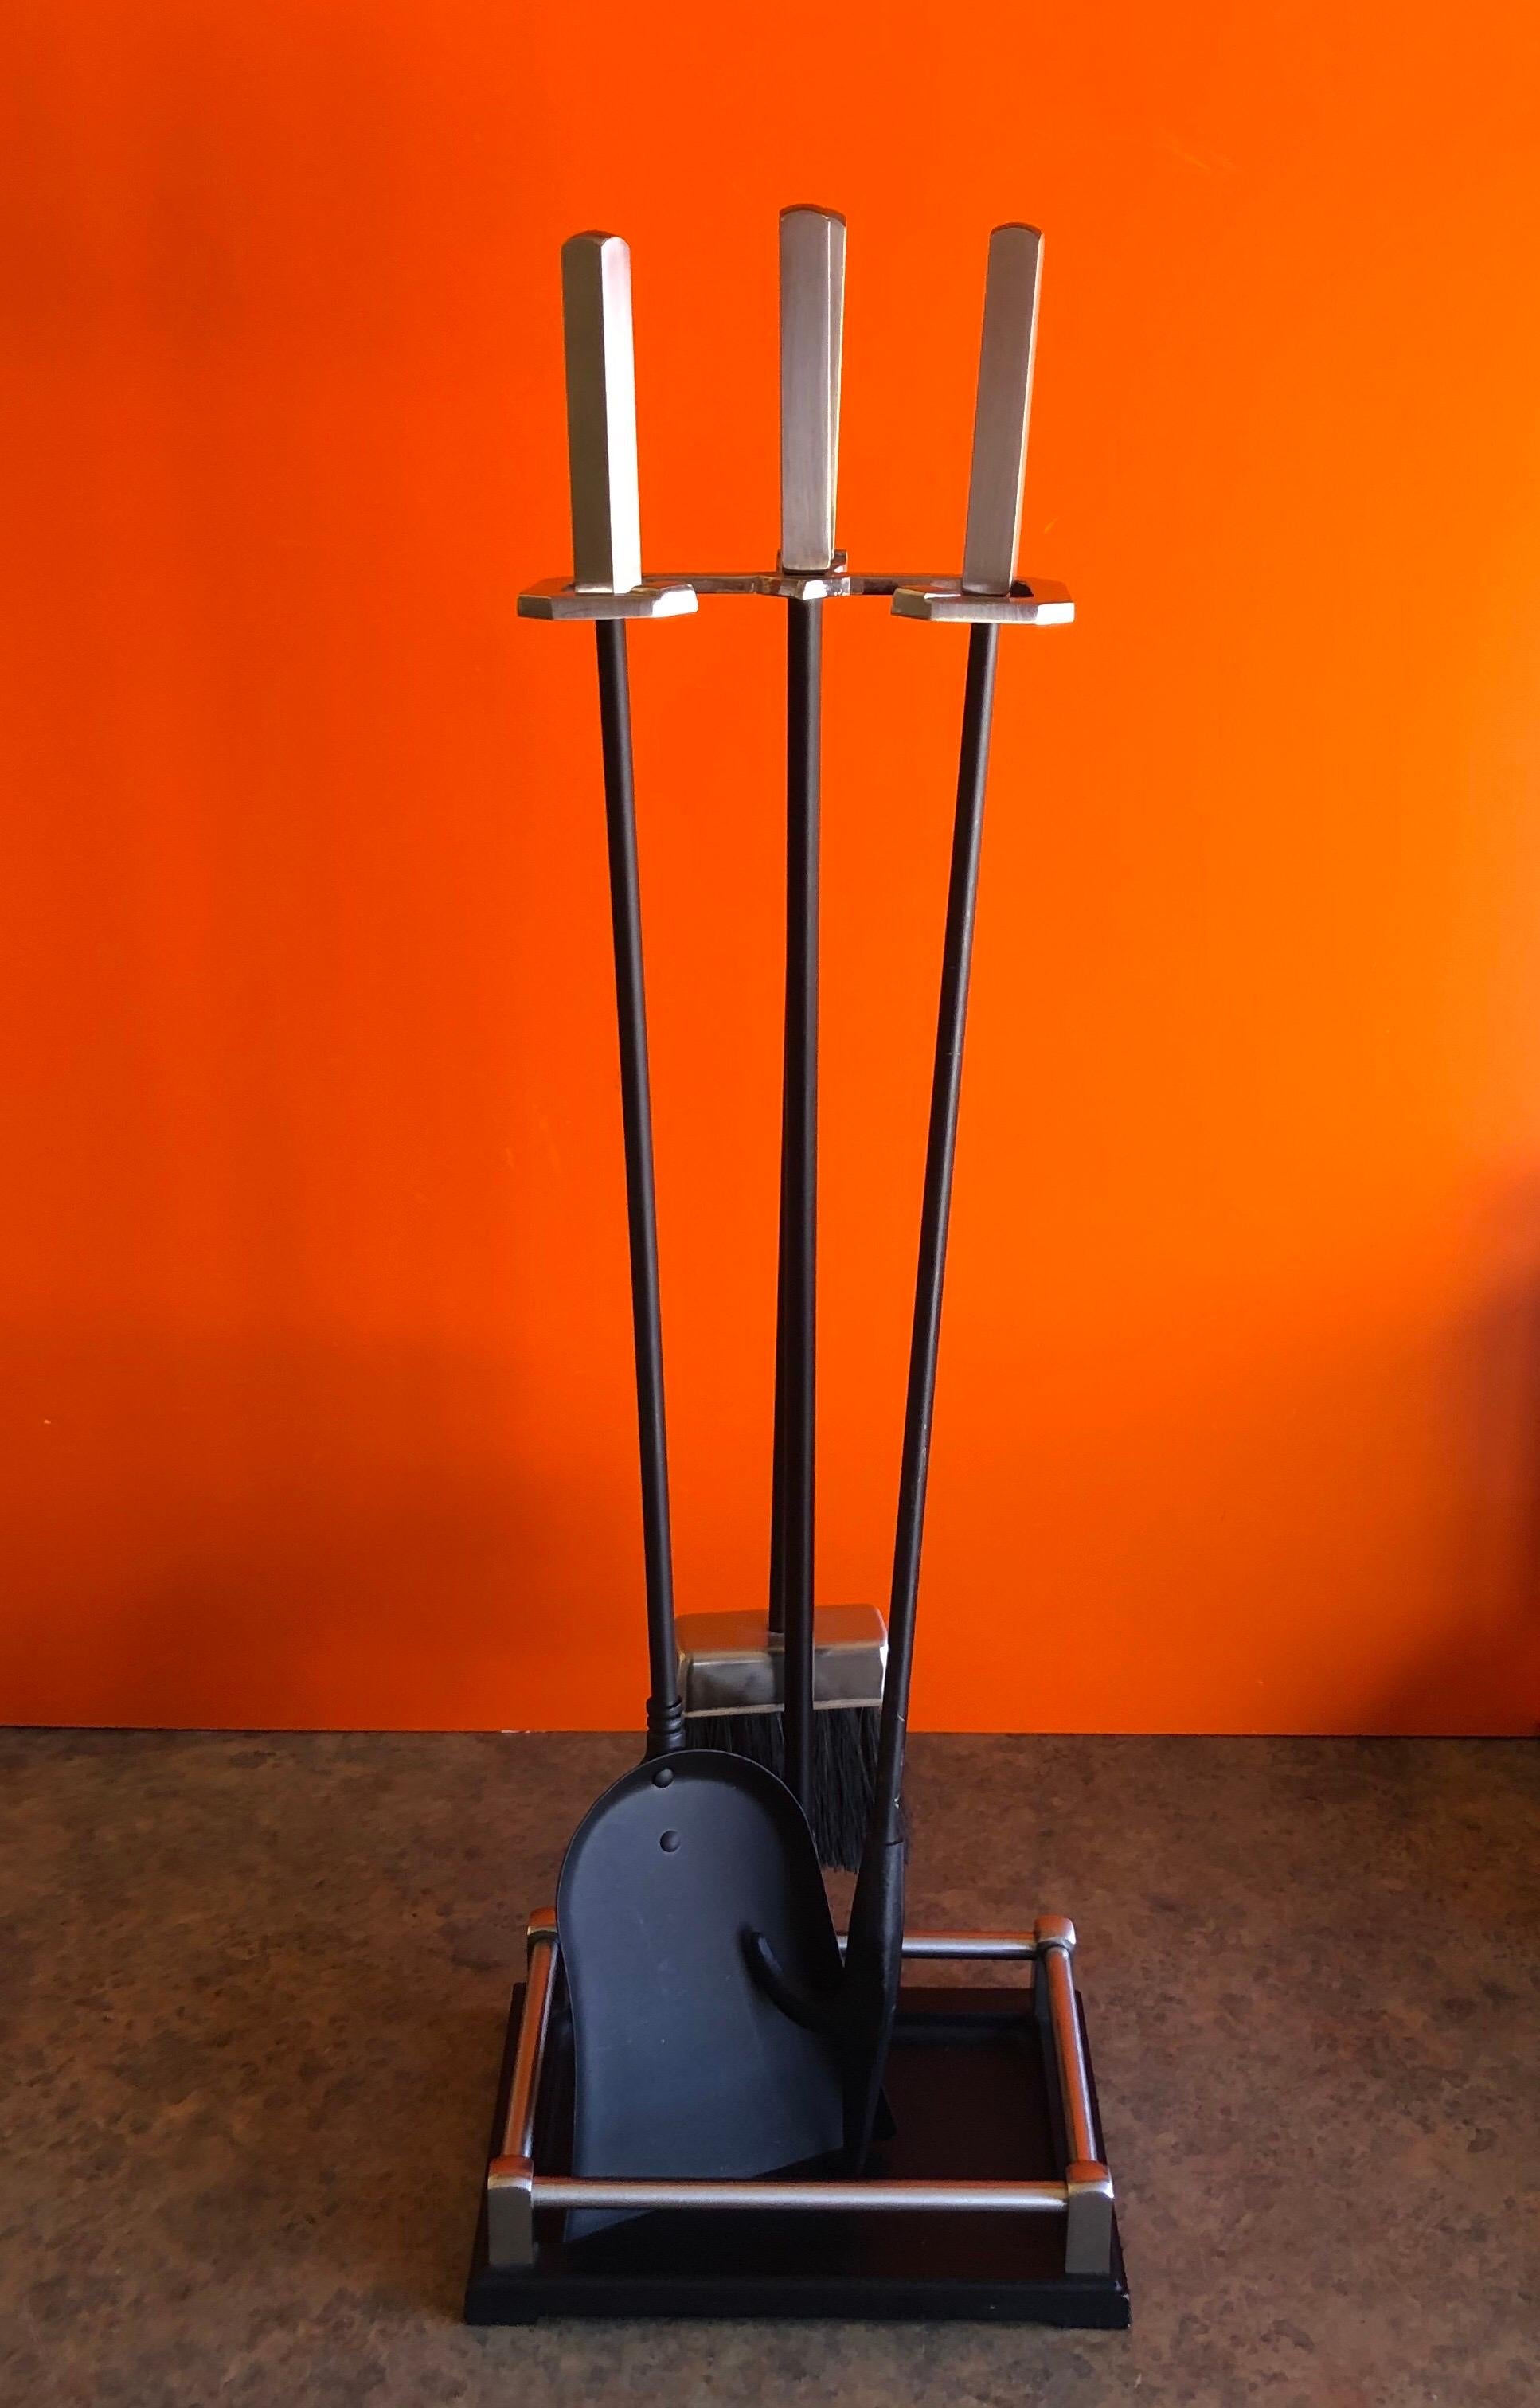 Modernist set of fire place tools with stainless steel handles, circa 1980s. There are three tools (shovel, brush and poker) and a single column stand in very good vintage condition. The set measures: 28